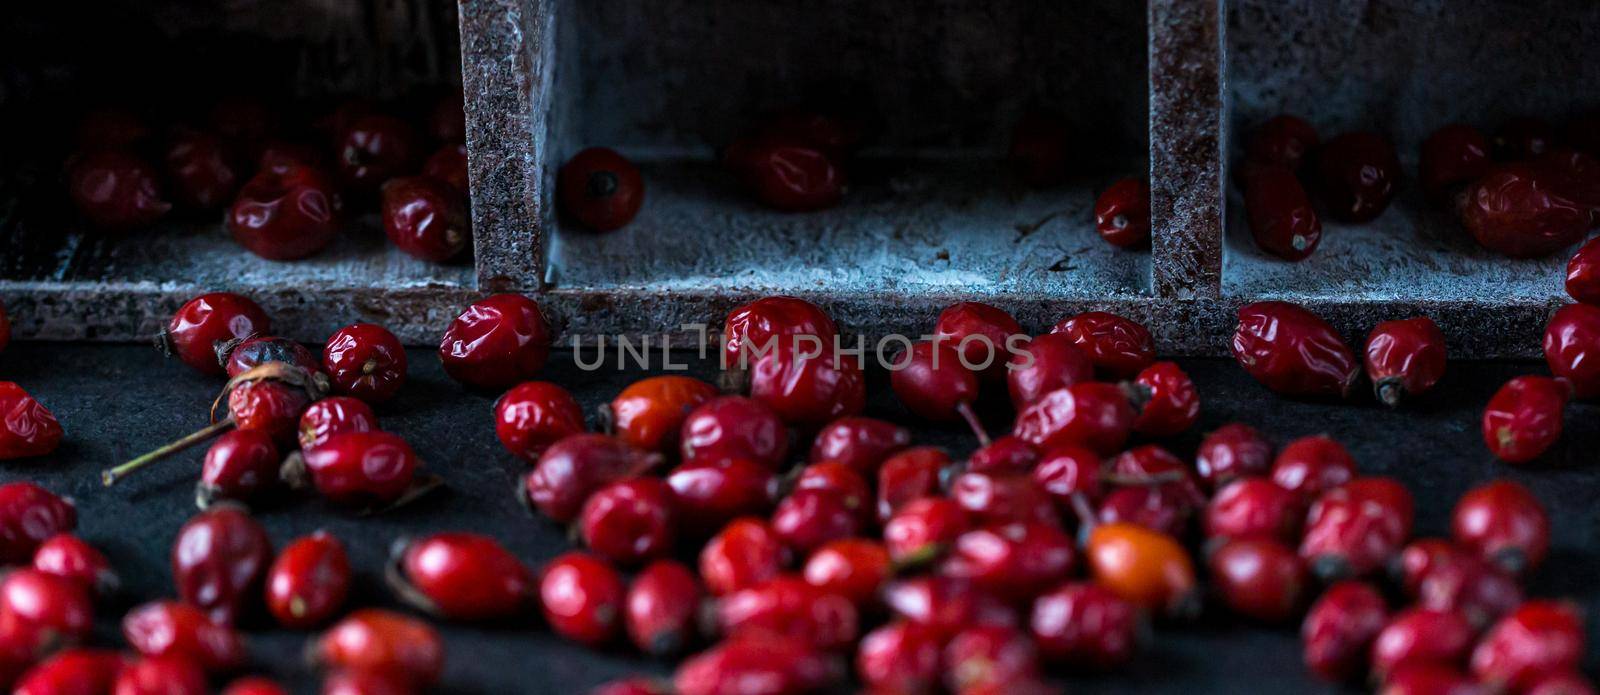 dried rosehip fruits on the table by Ciorba